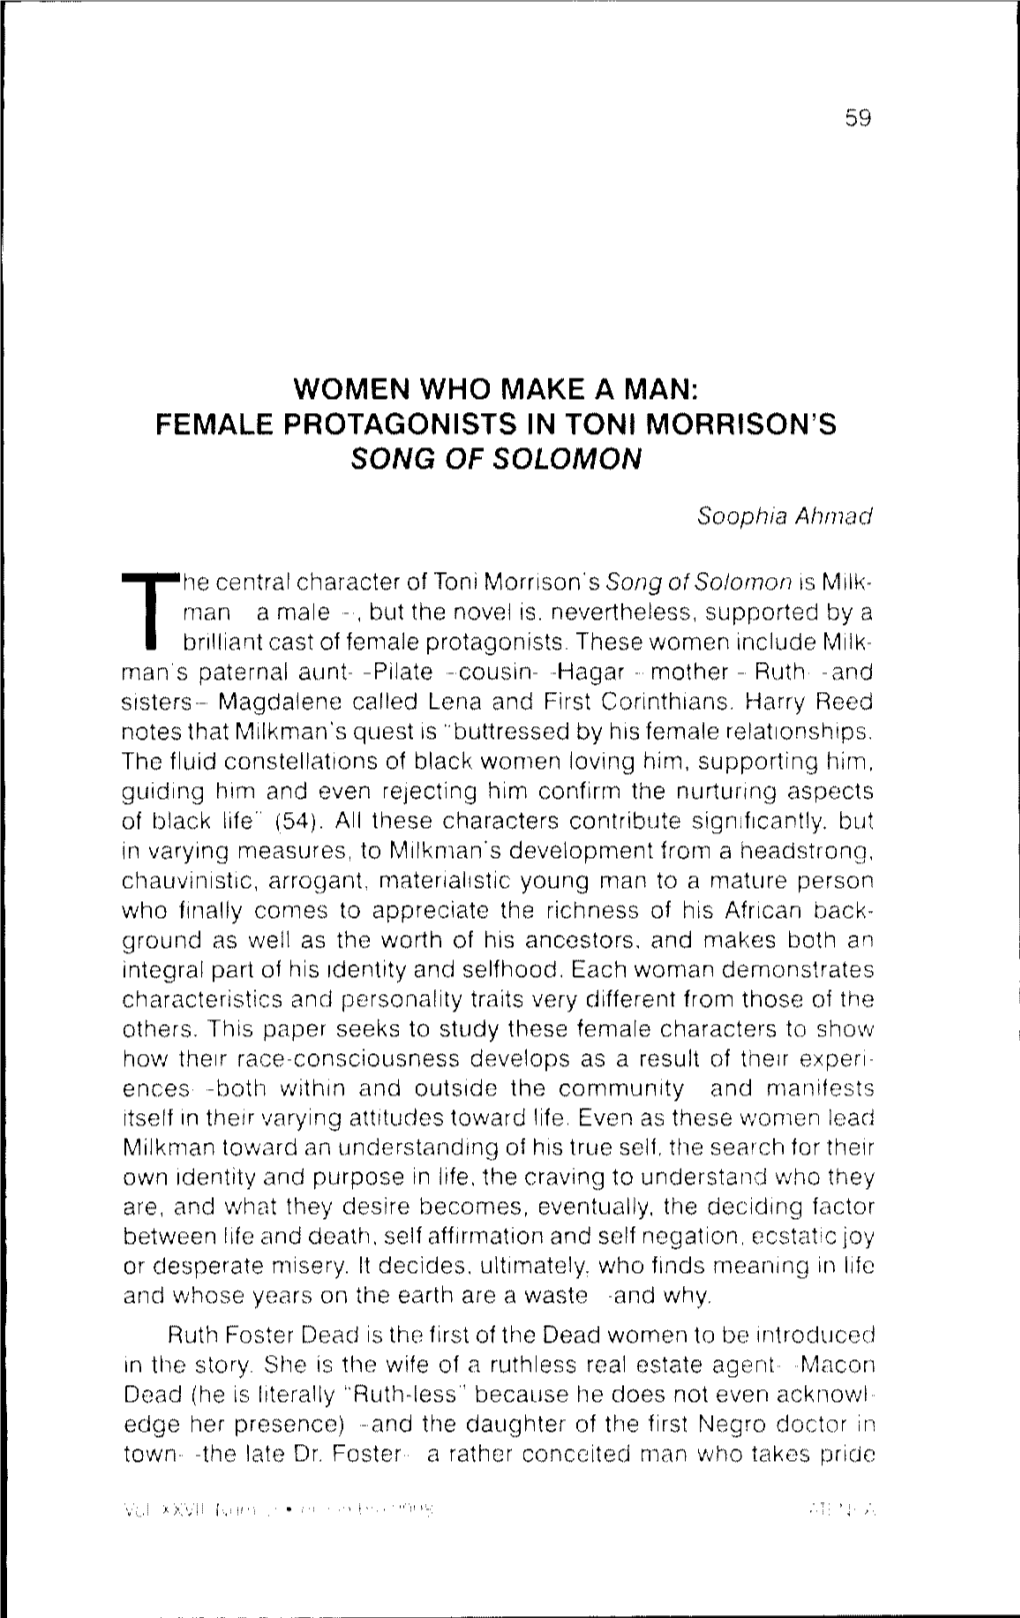 WOMEN WHO MAKE a MAN: FEMALE Protagonists in TONI MORRISON's SONG of SOLOMON